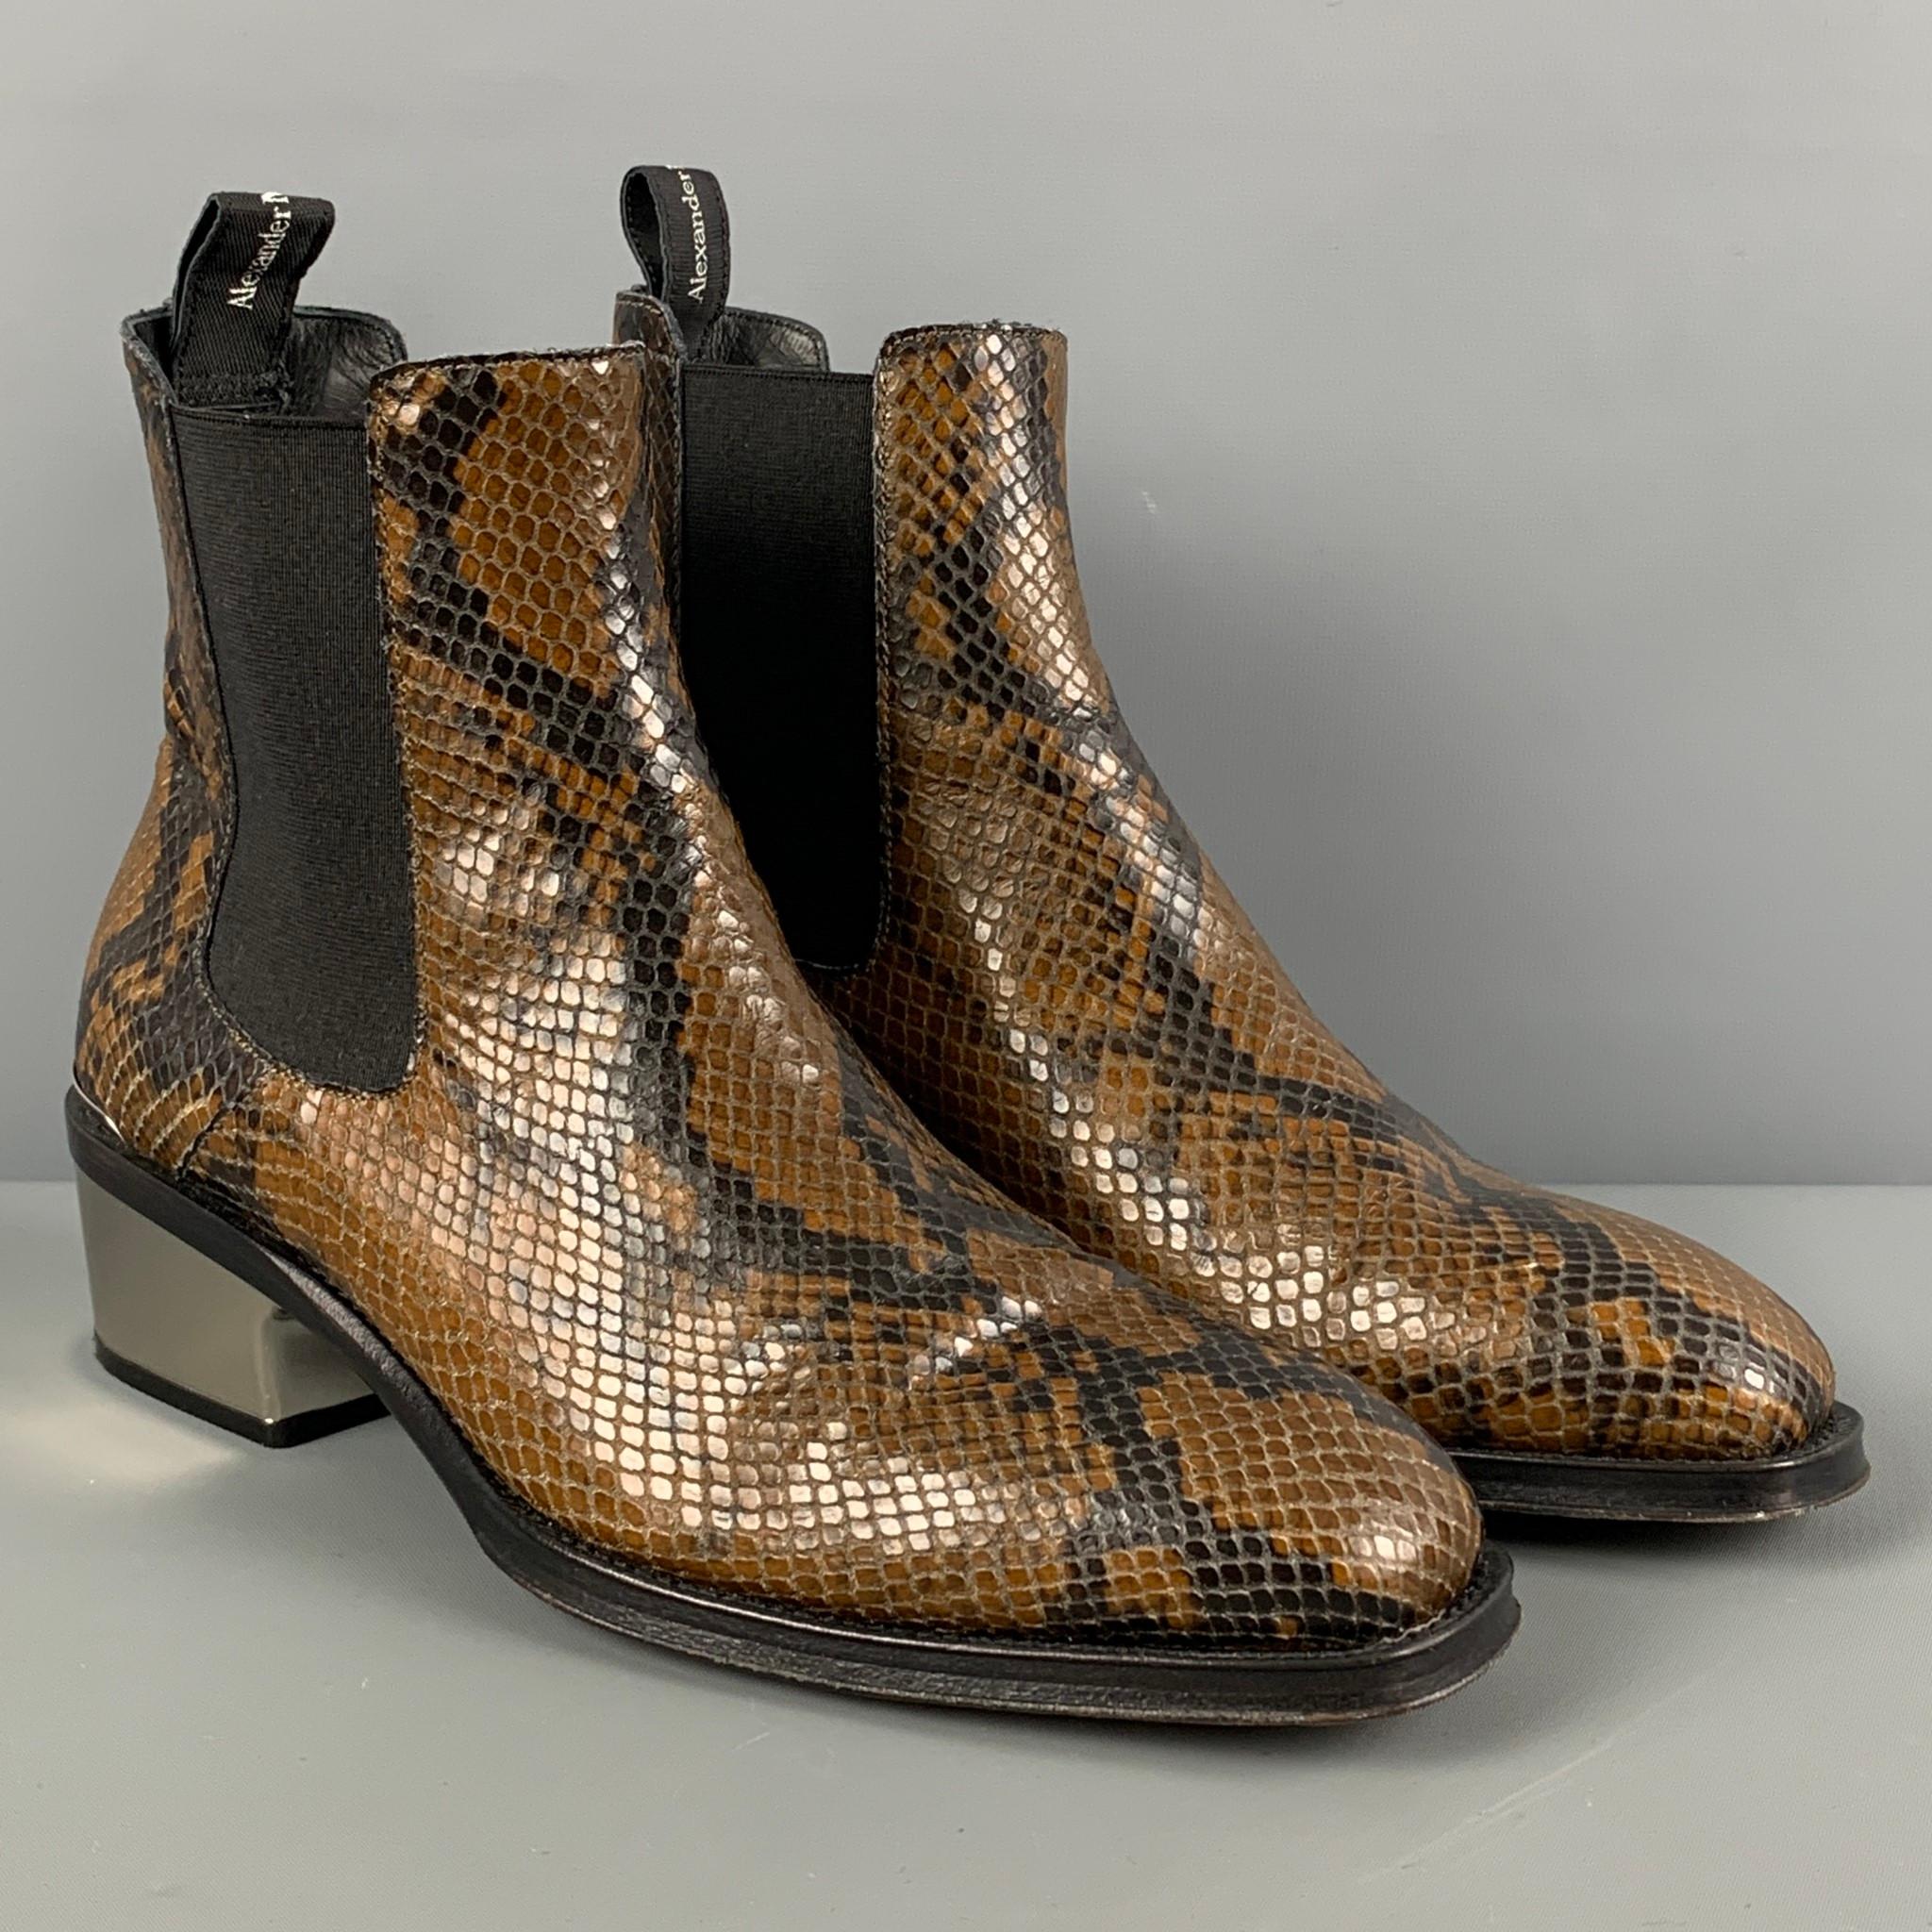 ALEXANDER McQUEEN boots comes in a brown & black animal print leather featuring a chelsea style, square toe, and a silver tone heel. Made in Italy. 

Very Good Pre-Owned Condition.
Marked: 41

Measurements:

Length: 11 in.
Width: 4 in.
Height: 5.75